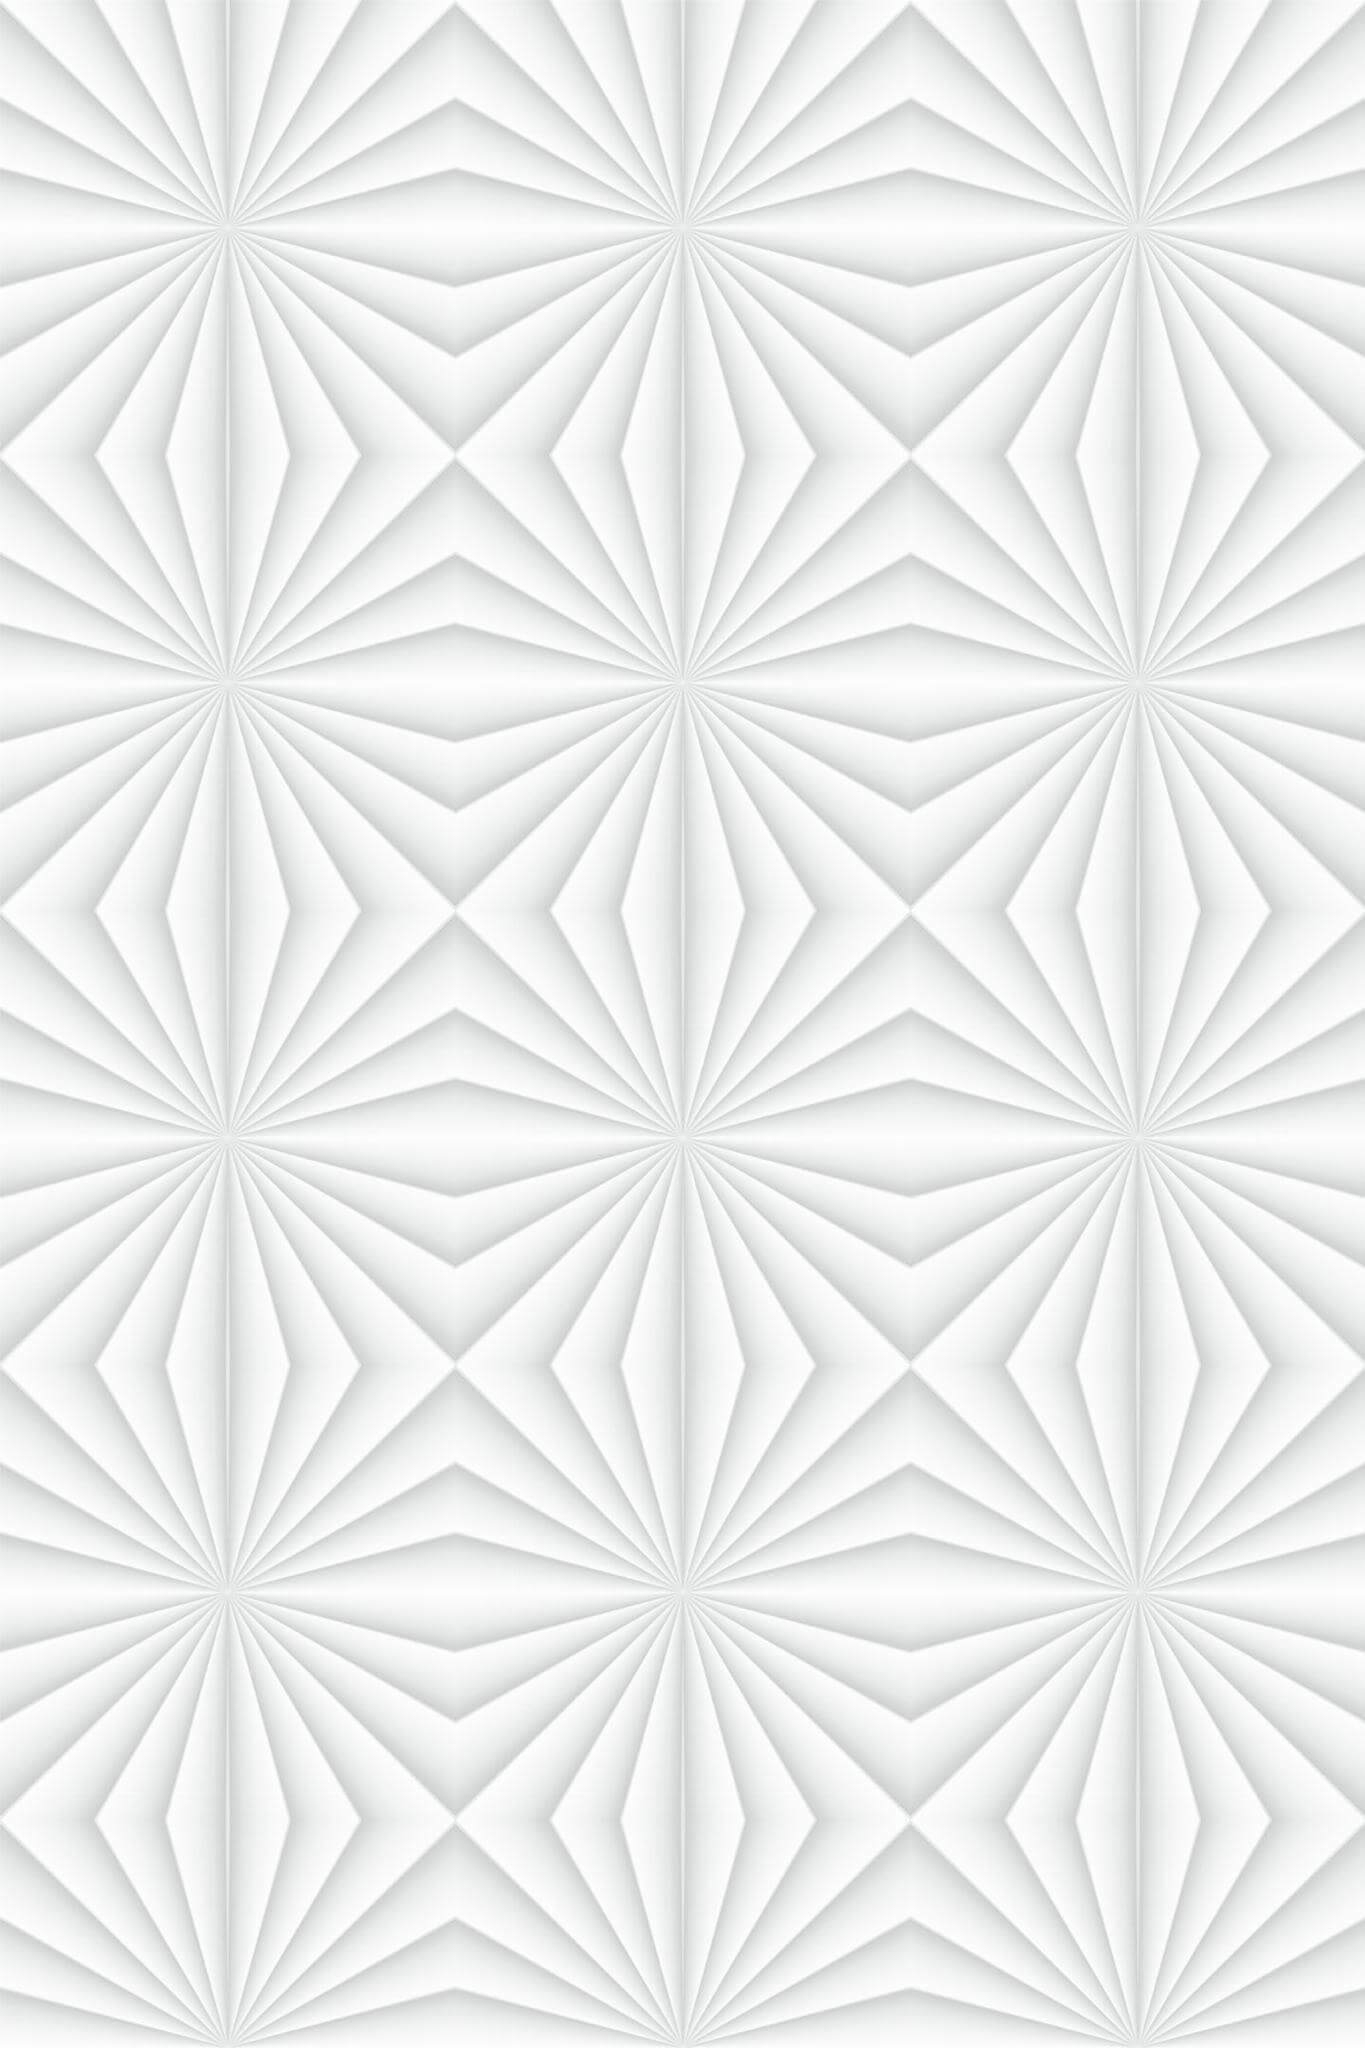 3D geometric Wallpaper - Peel and Stick or Non-Pasted